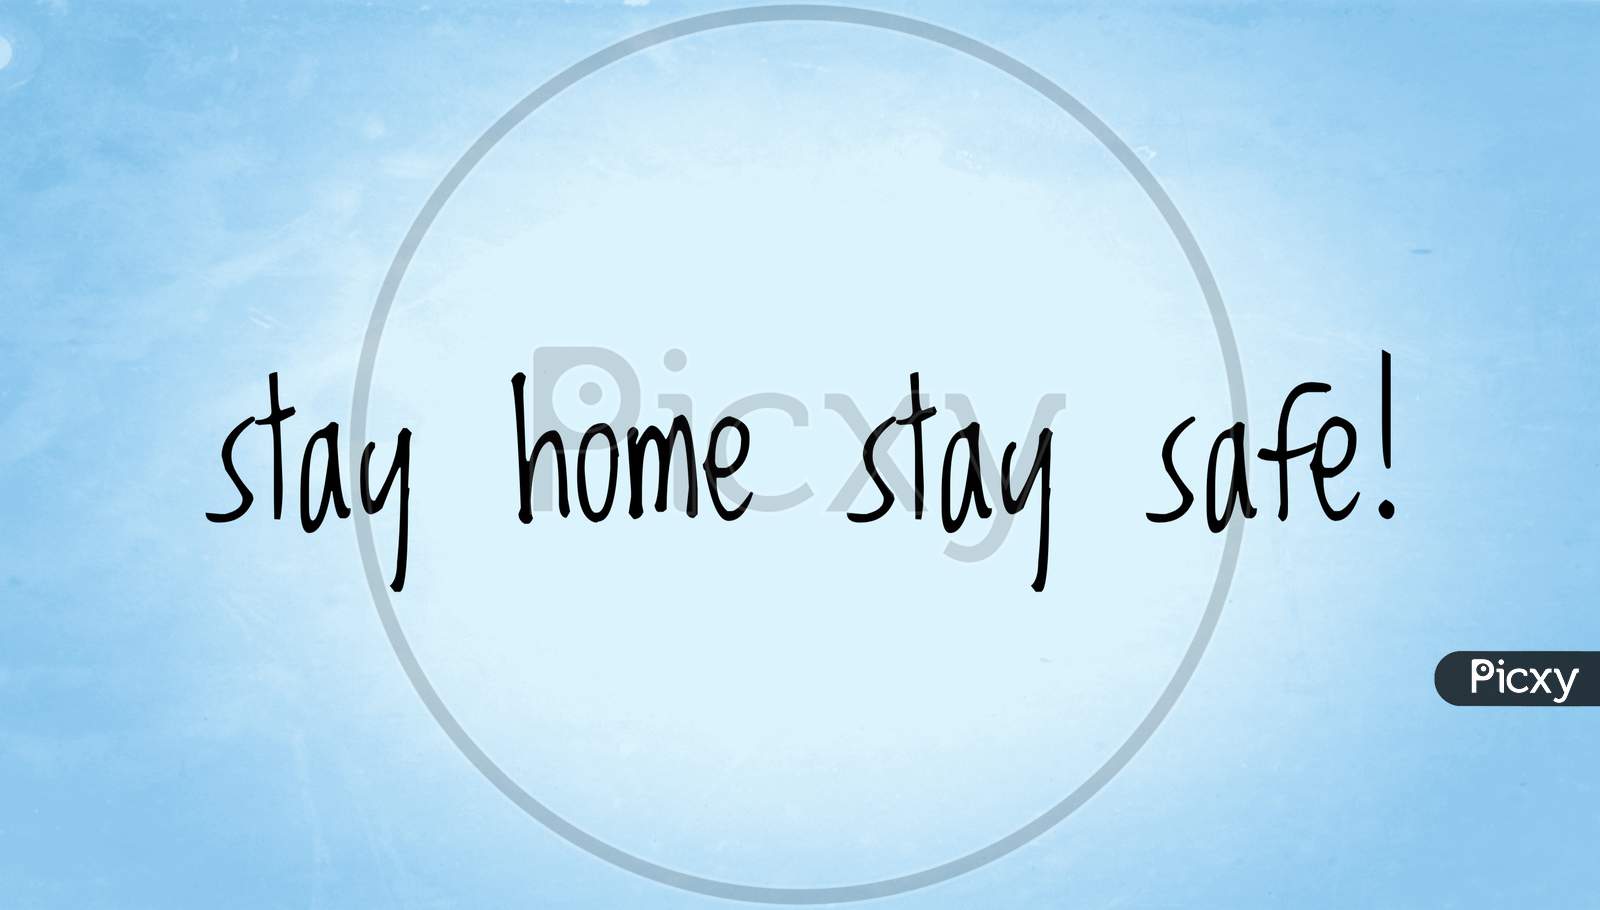 Stay home stay safe text words written in blue paper background texture, precautions for corona virus infection, the pandemic Alert of covid19, lockdown for home isolation